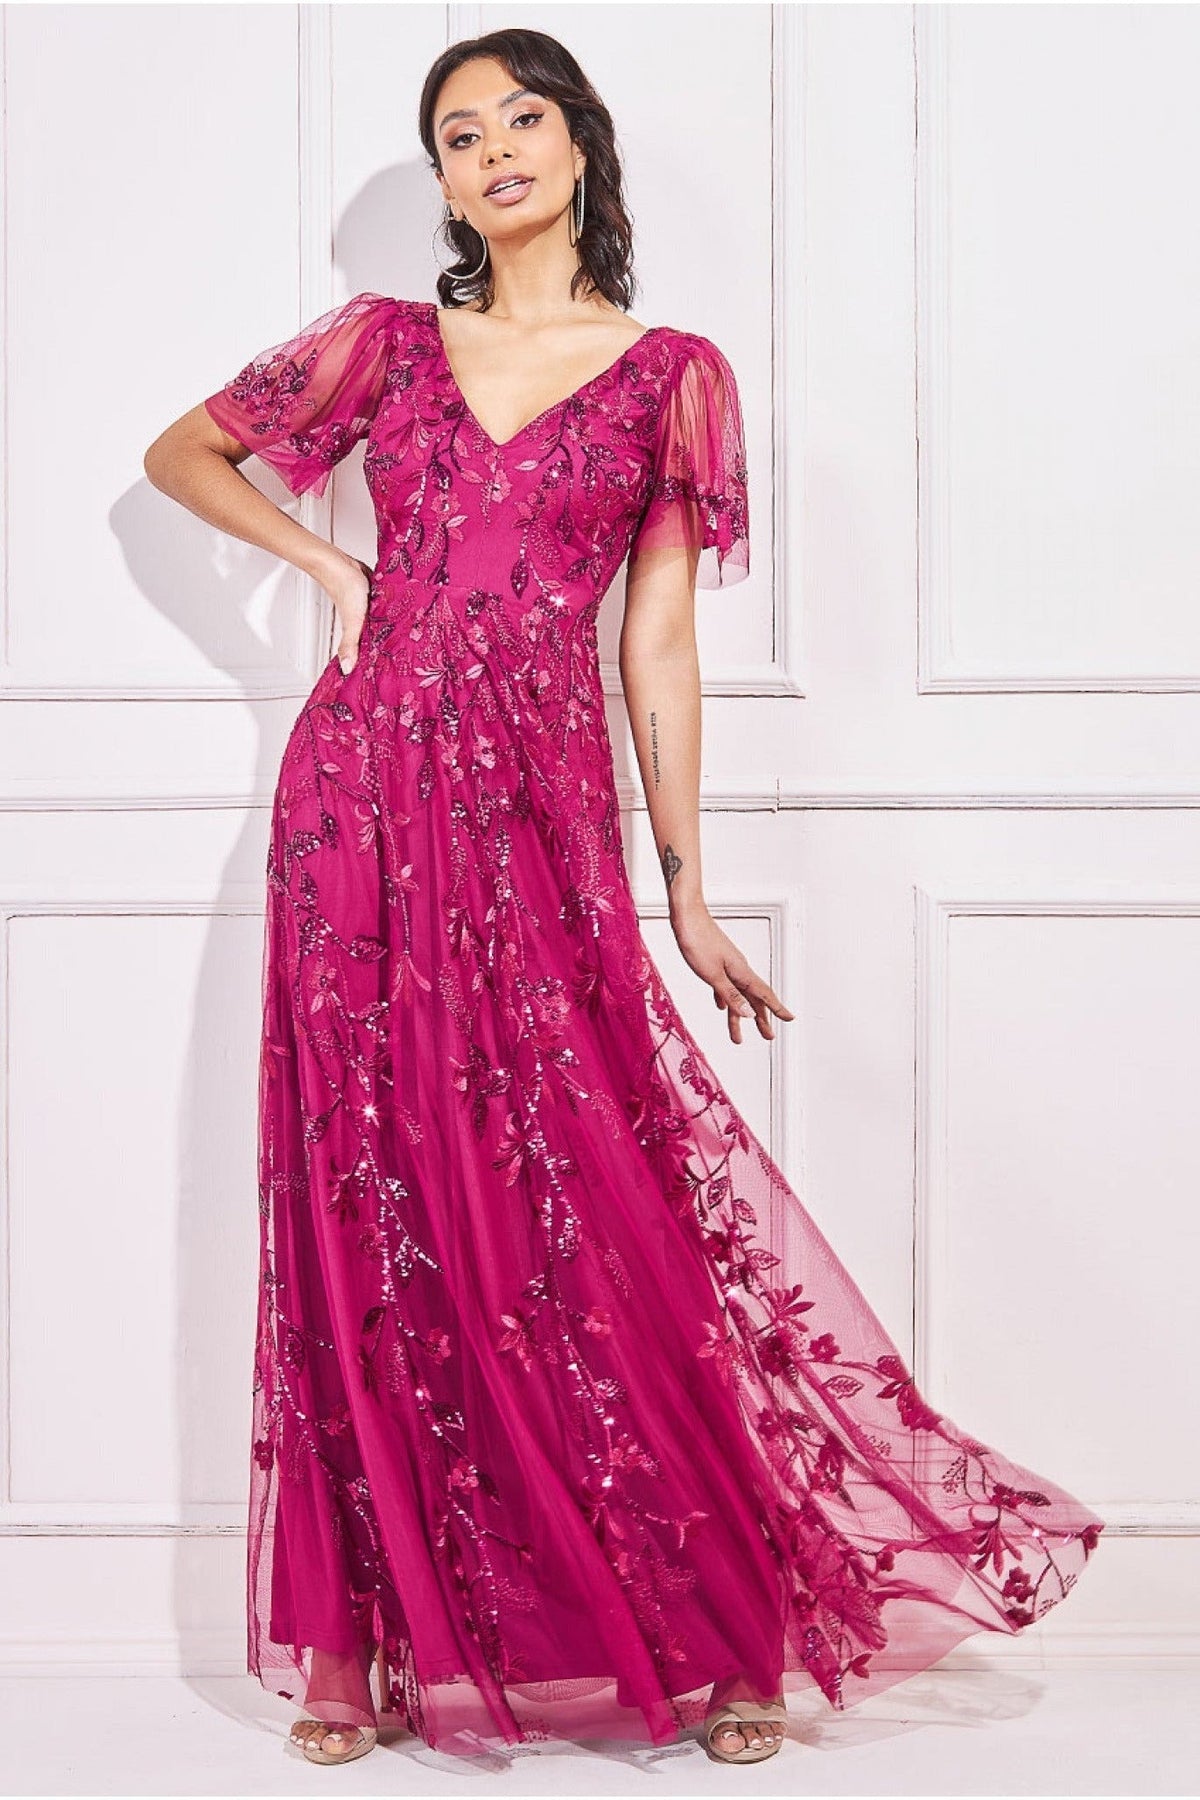 Flared Sleeve Embroidered Maxi Dress - Magenta DR3279A